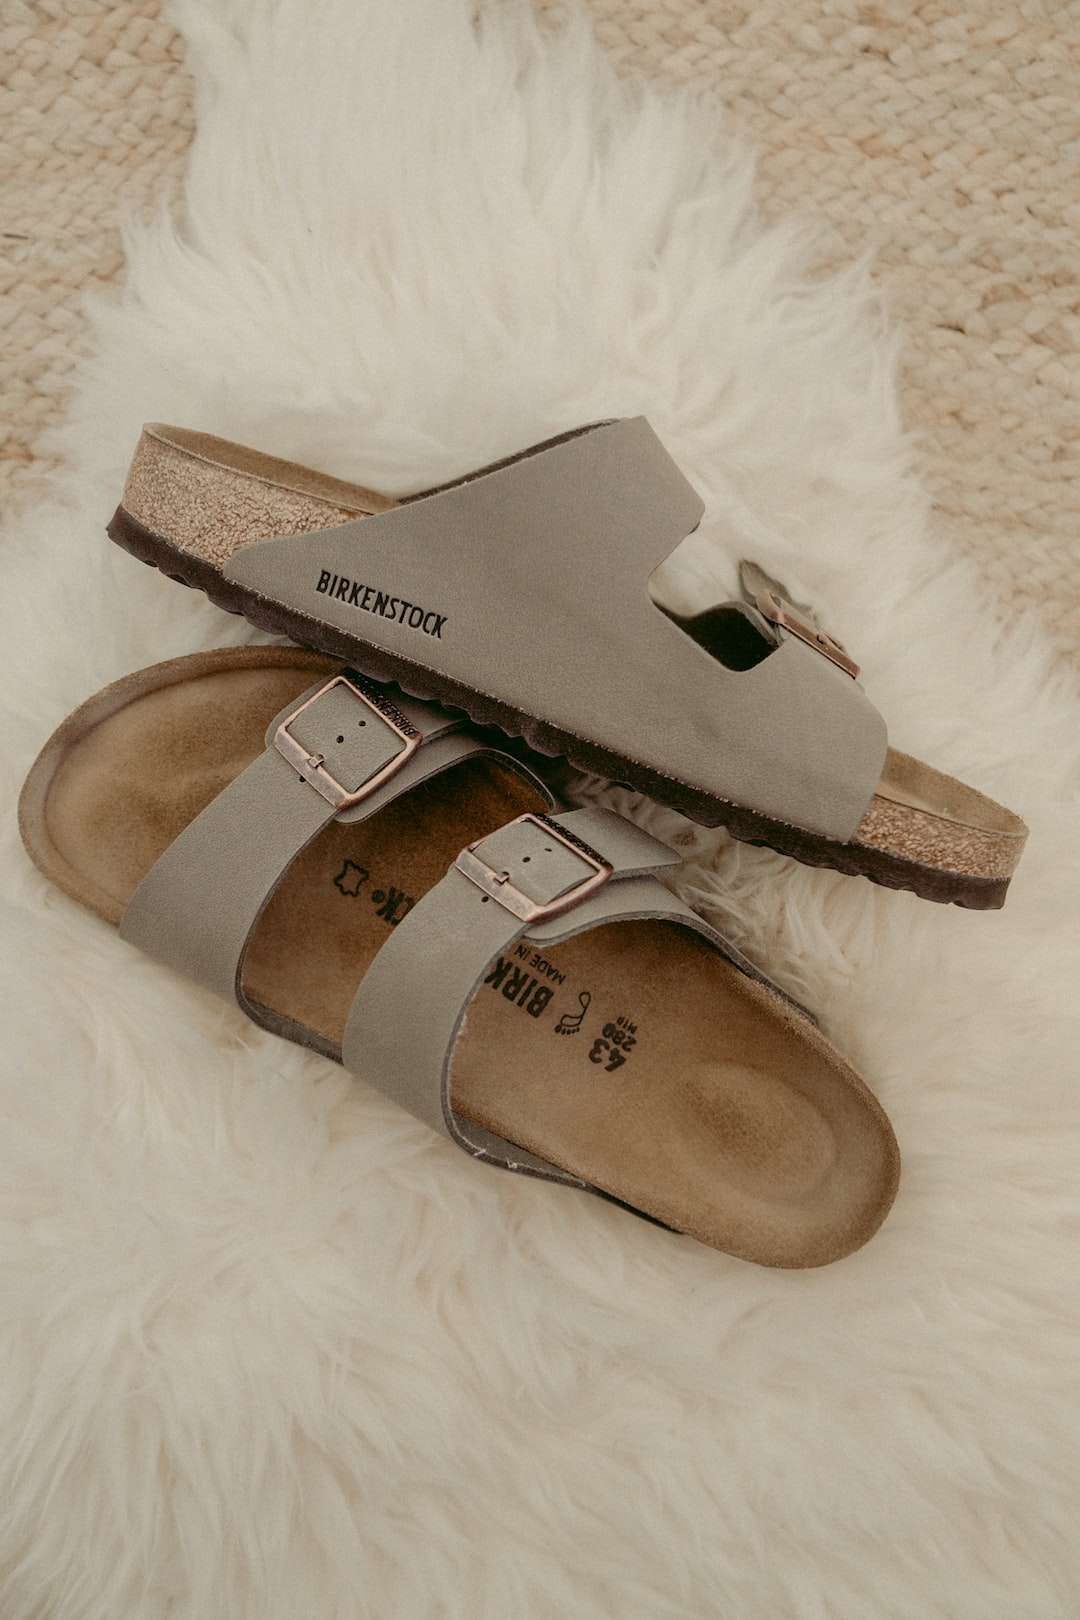 Read more about the article What Are the Most Popular Birkenstock Styles